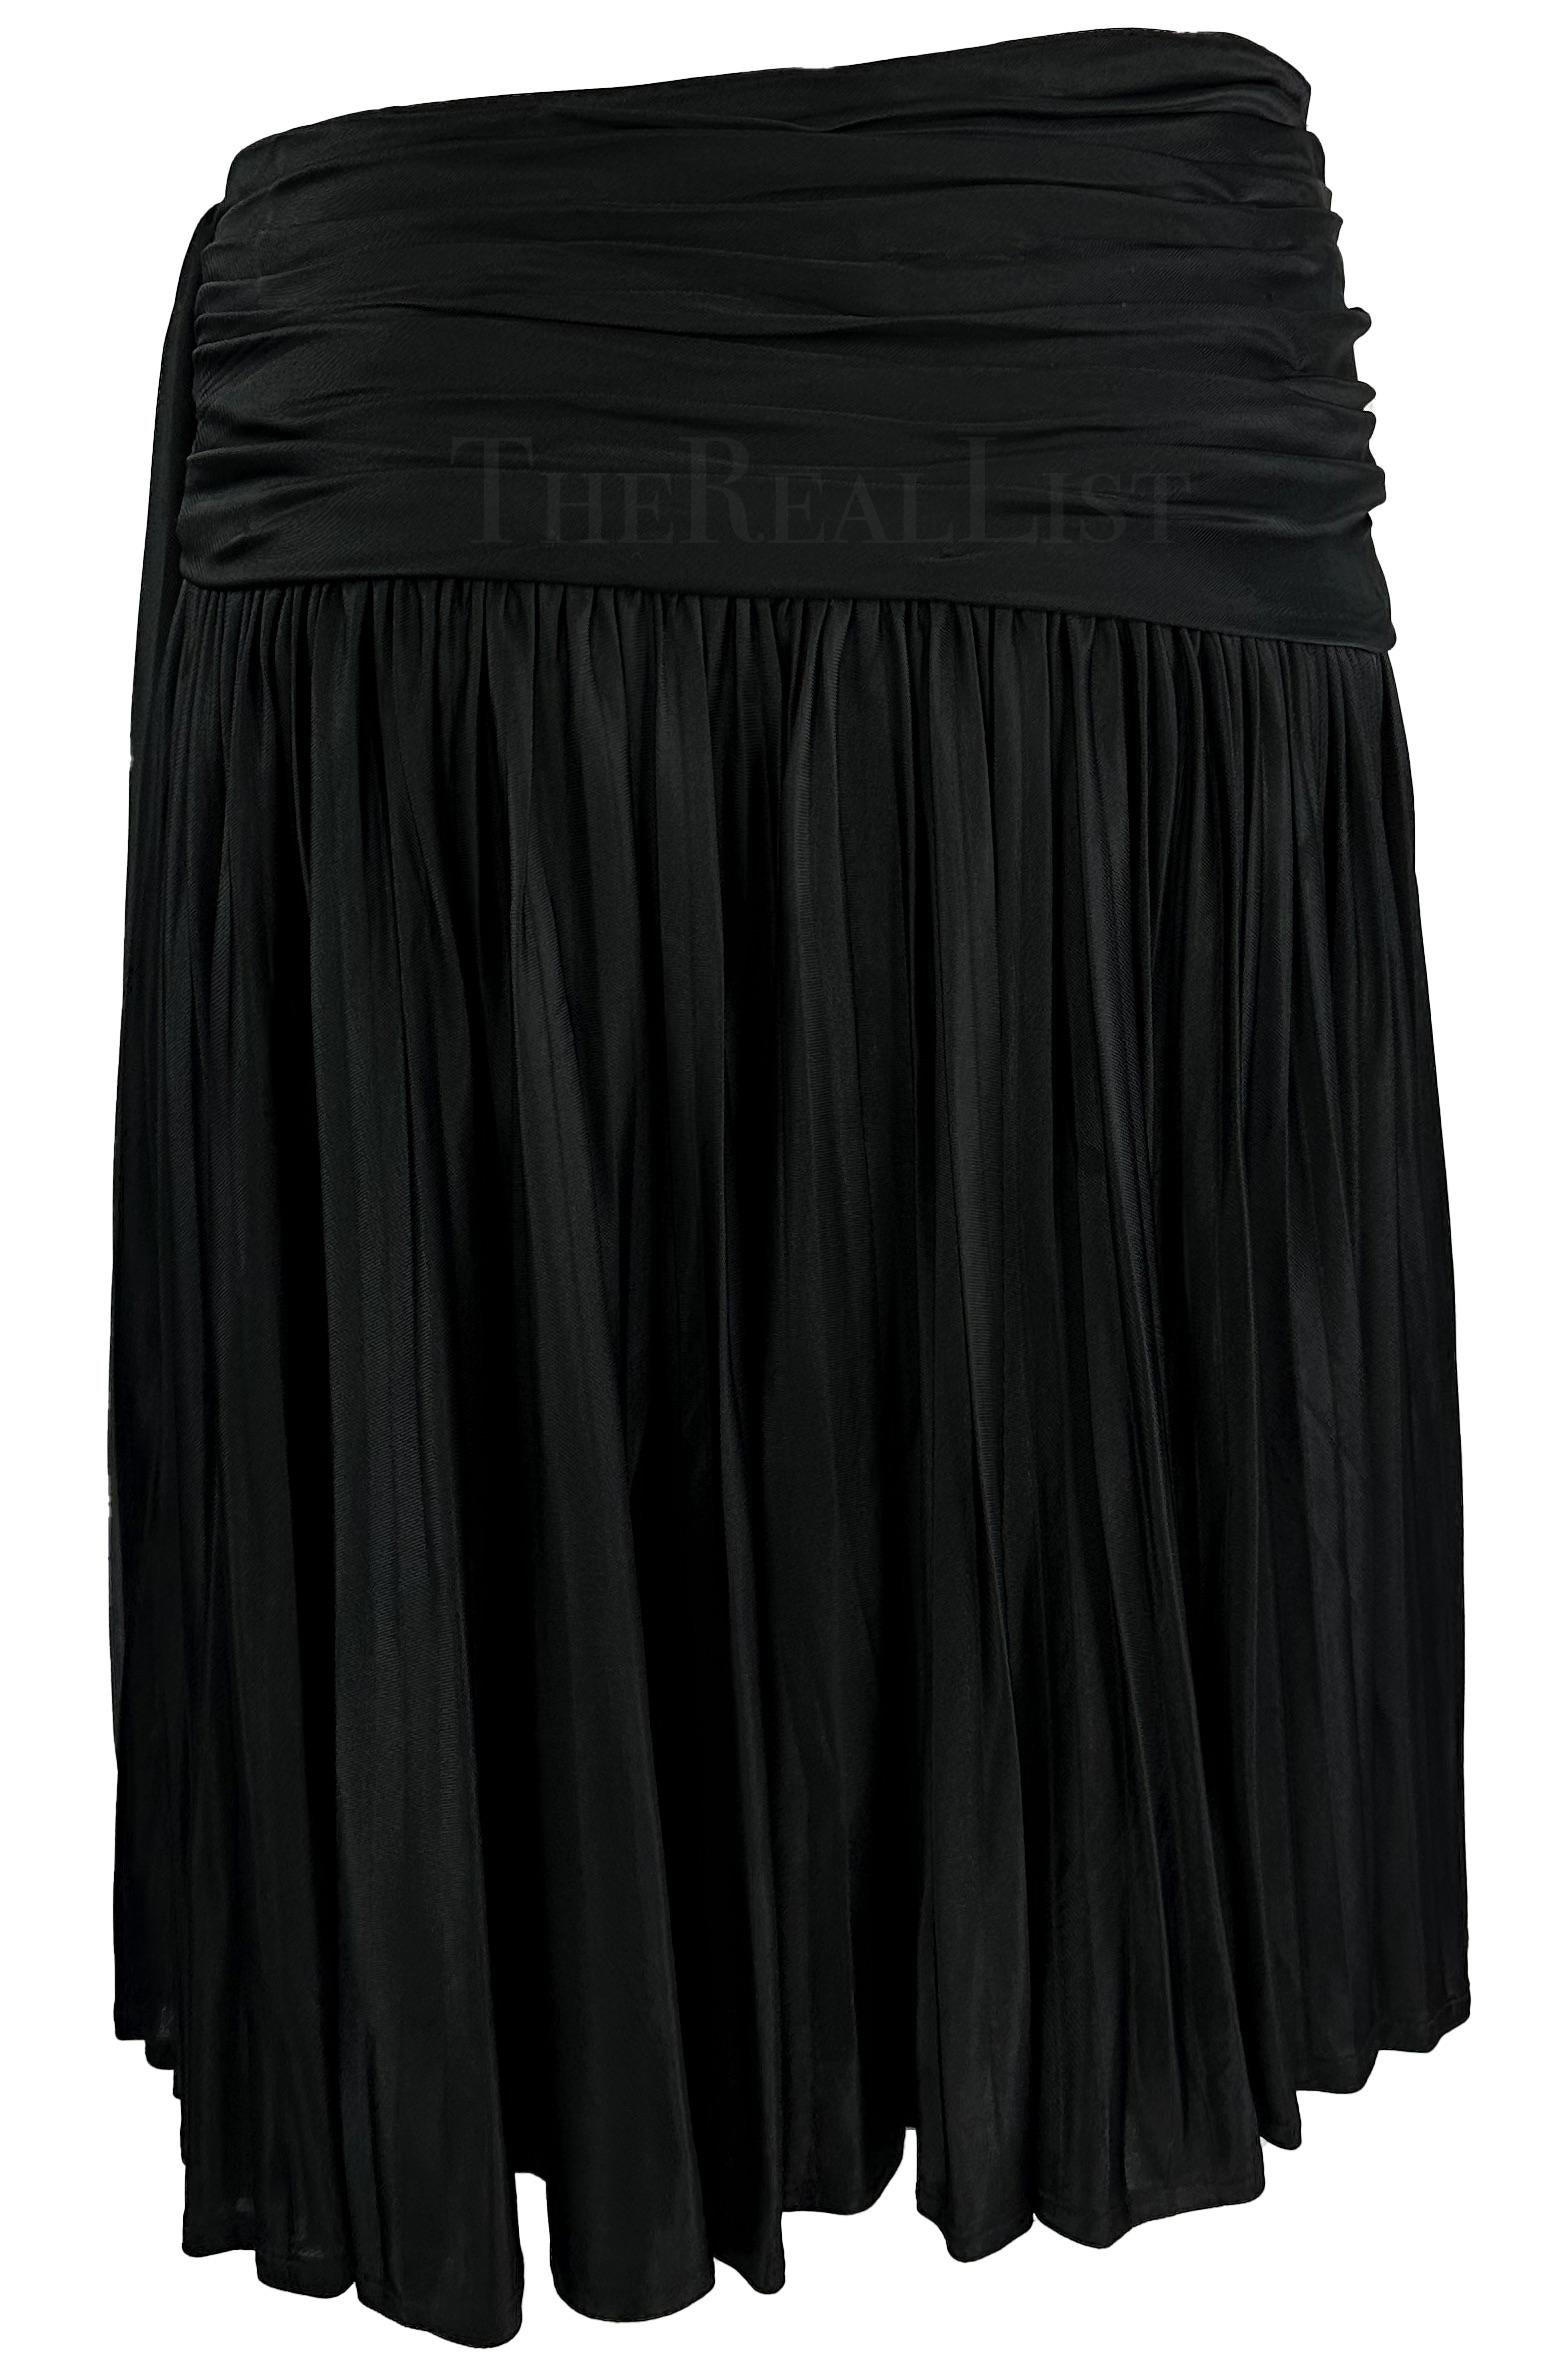 Women's S/S 1995 Gianni Versace Black Pleated Faux Wrap Flare Skirt For Sale